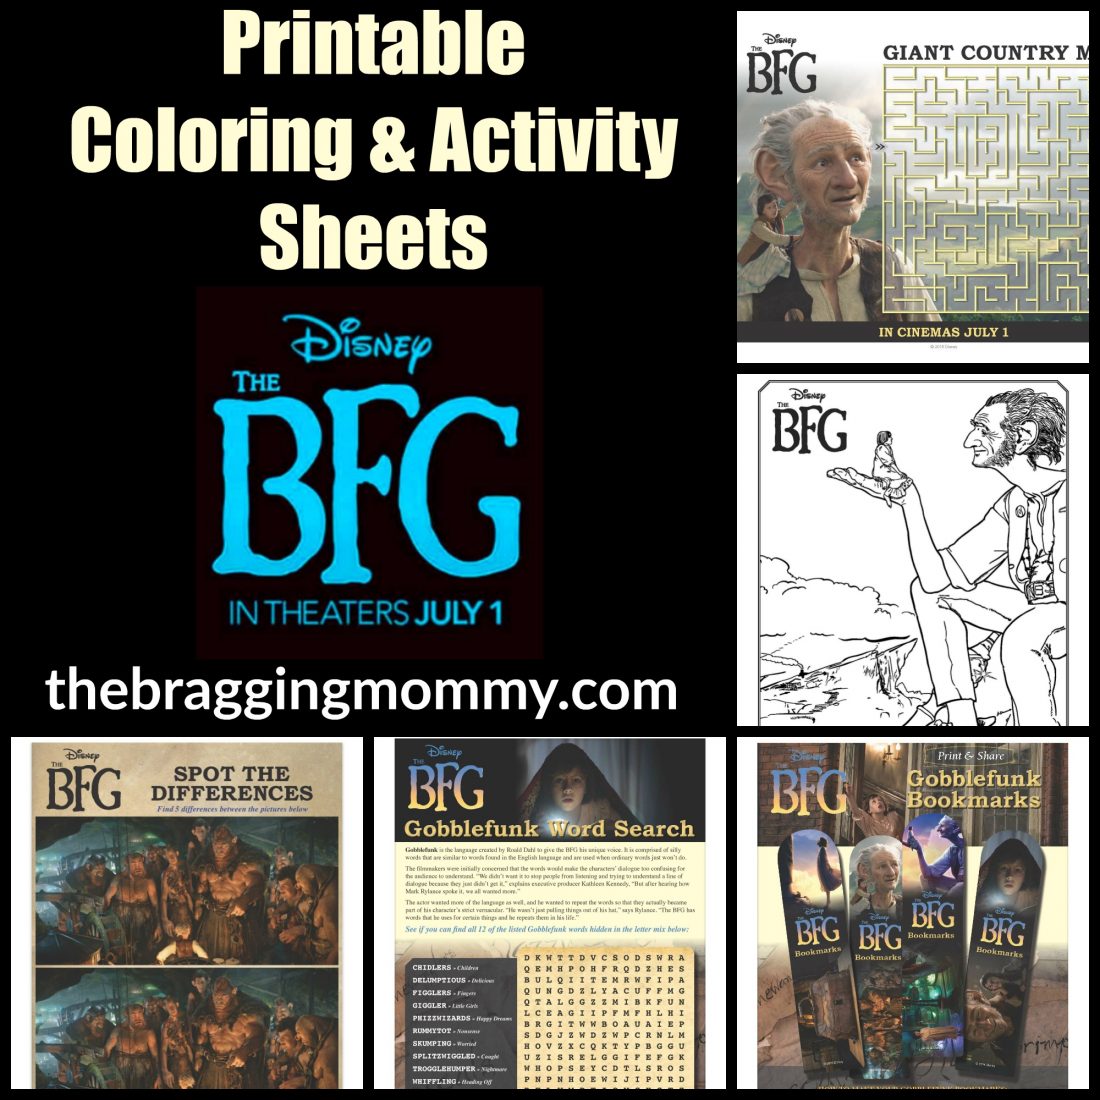 thebfgcoloring&activitysheets